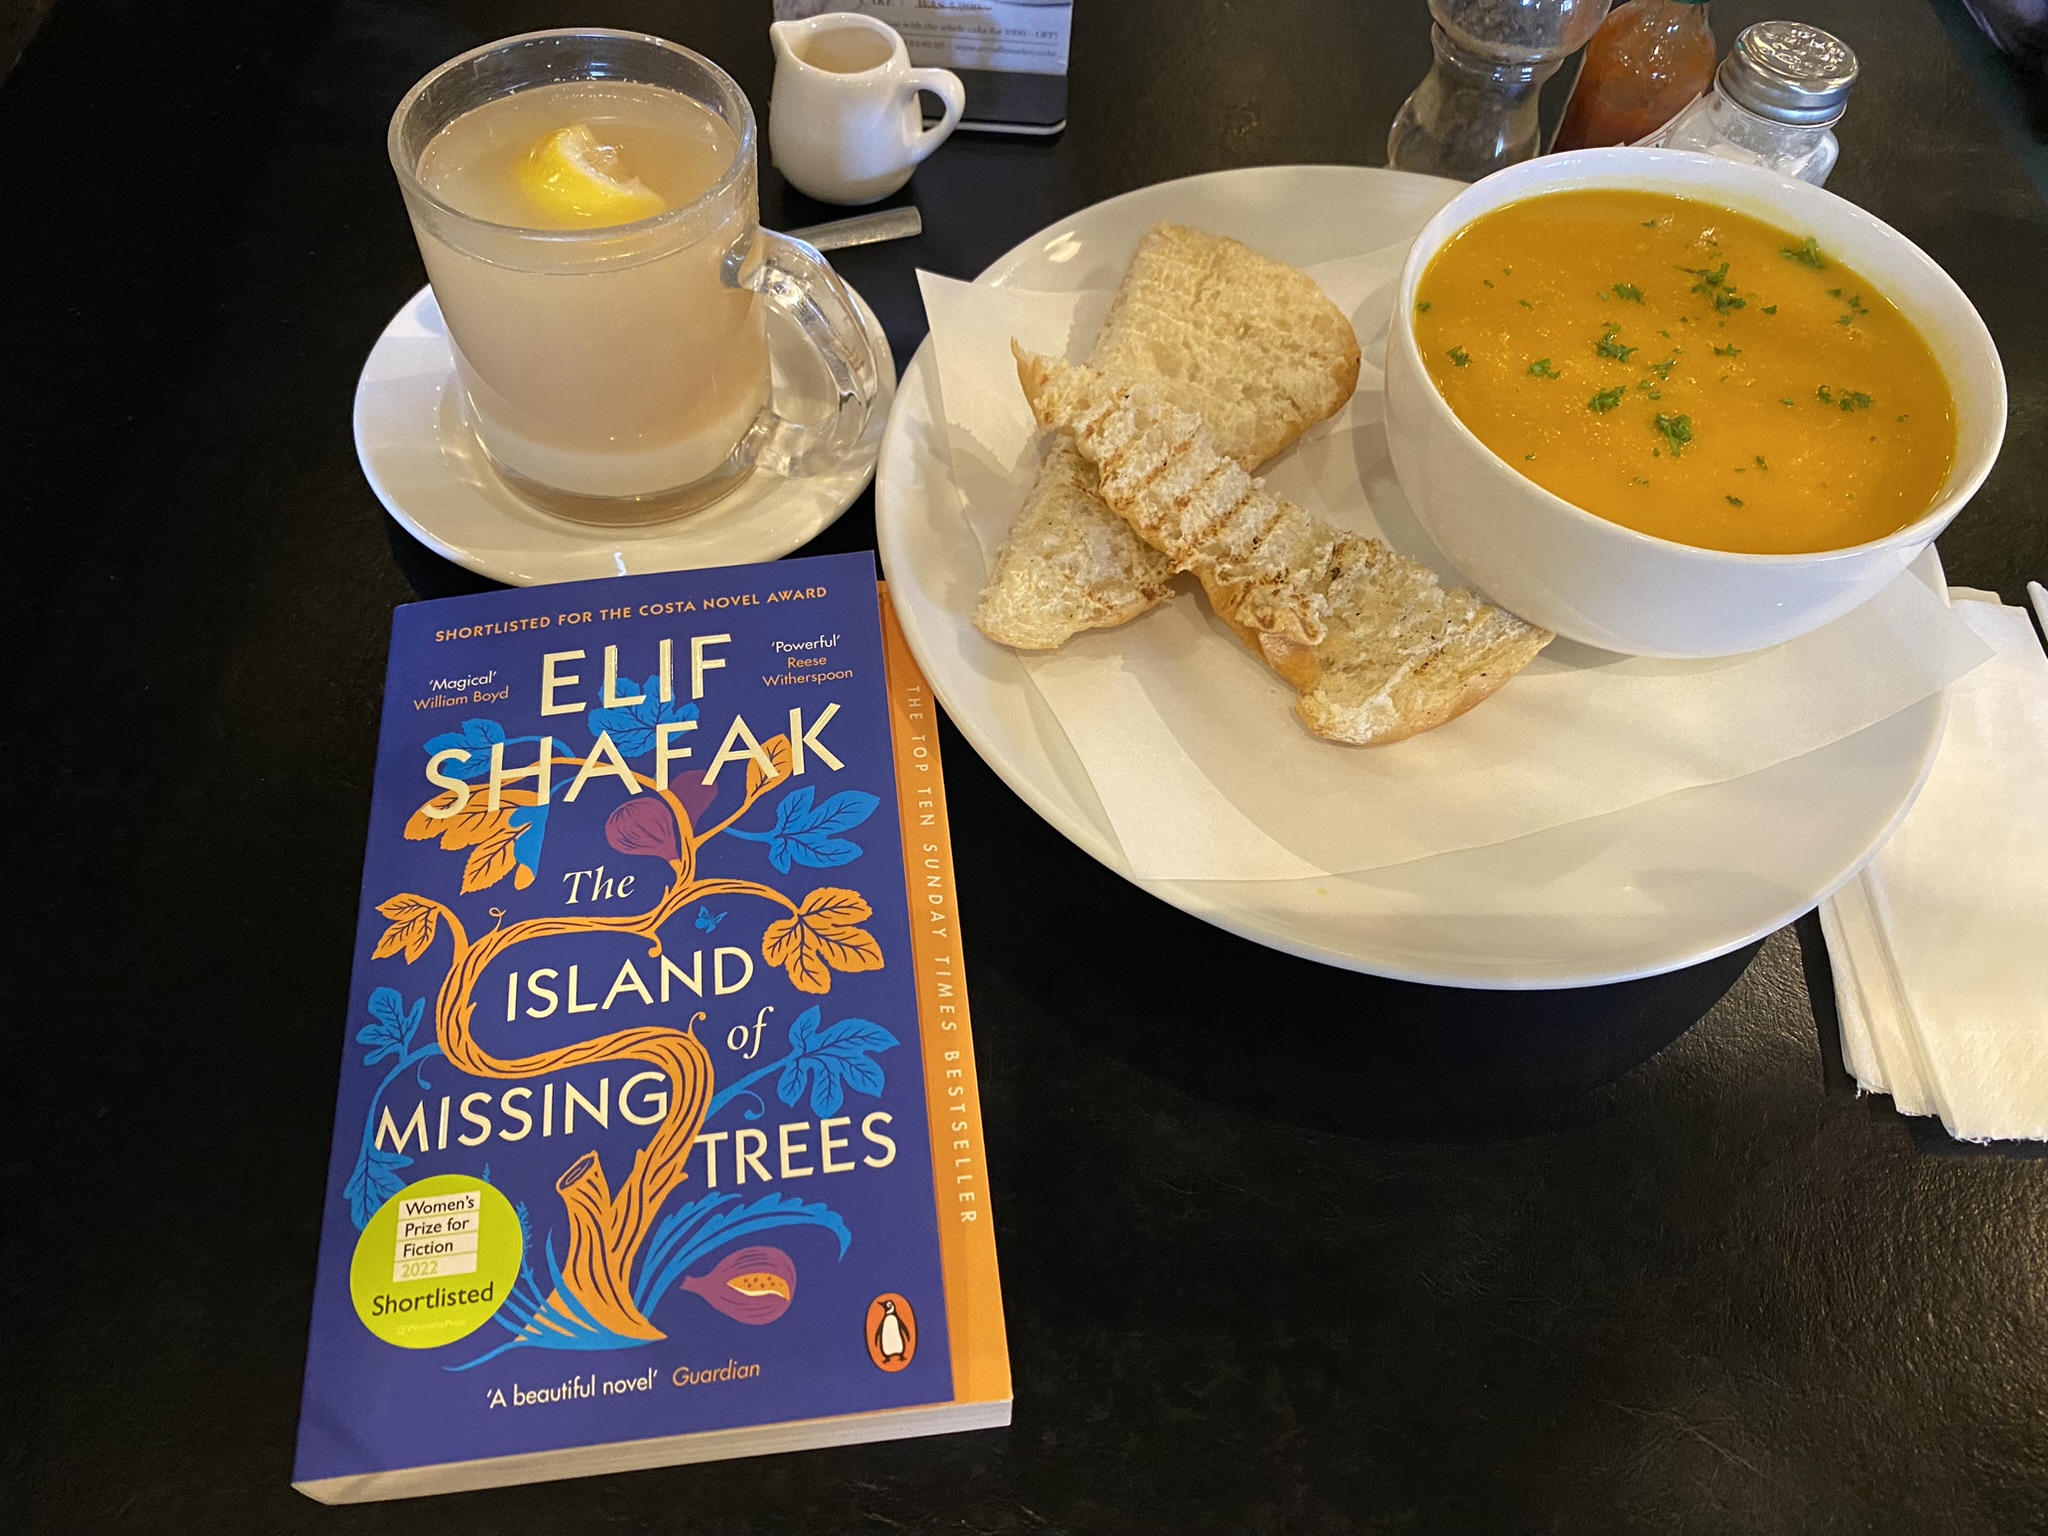 The Island of Missing Trees by Elif Shafak on a cafe's table with a bowl of soup, a side plate with ginger bread, and a glass of hot lemon and ginger tea